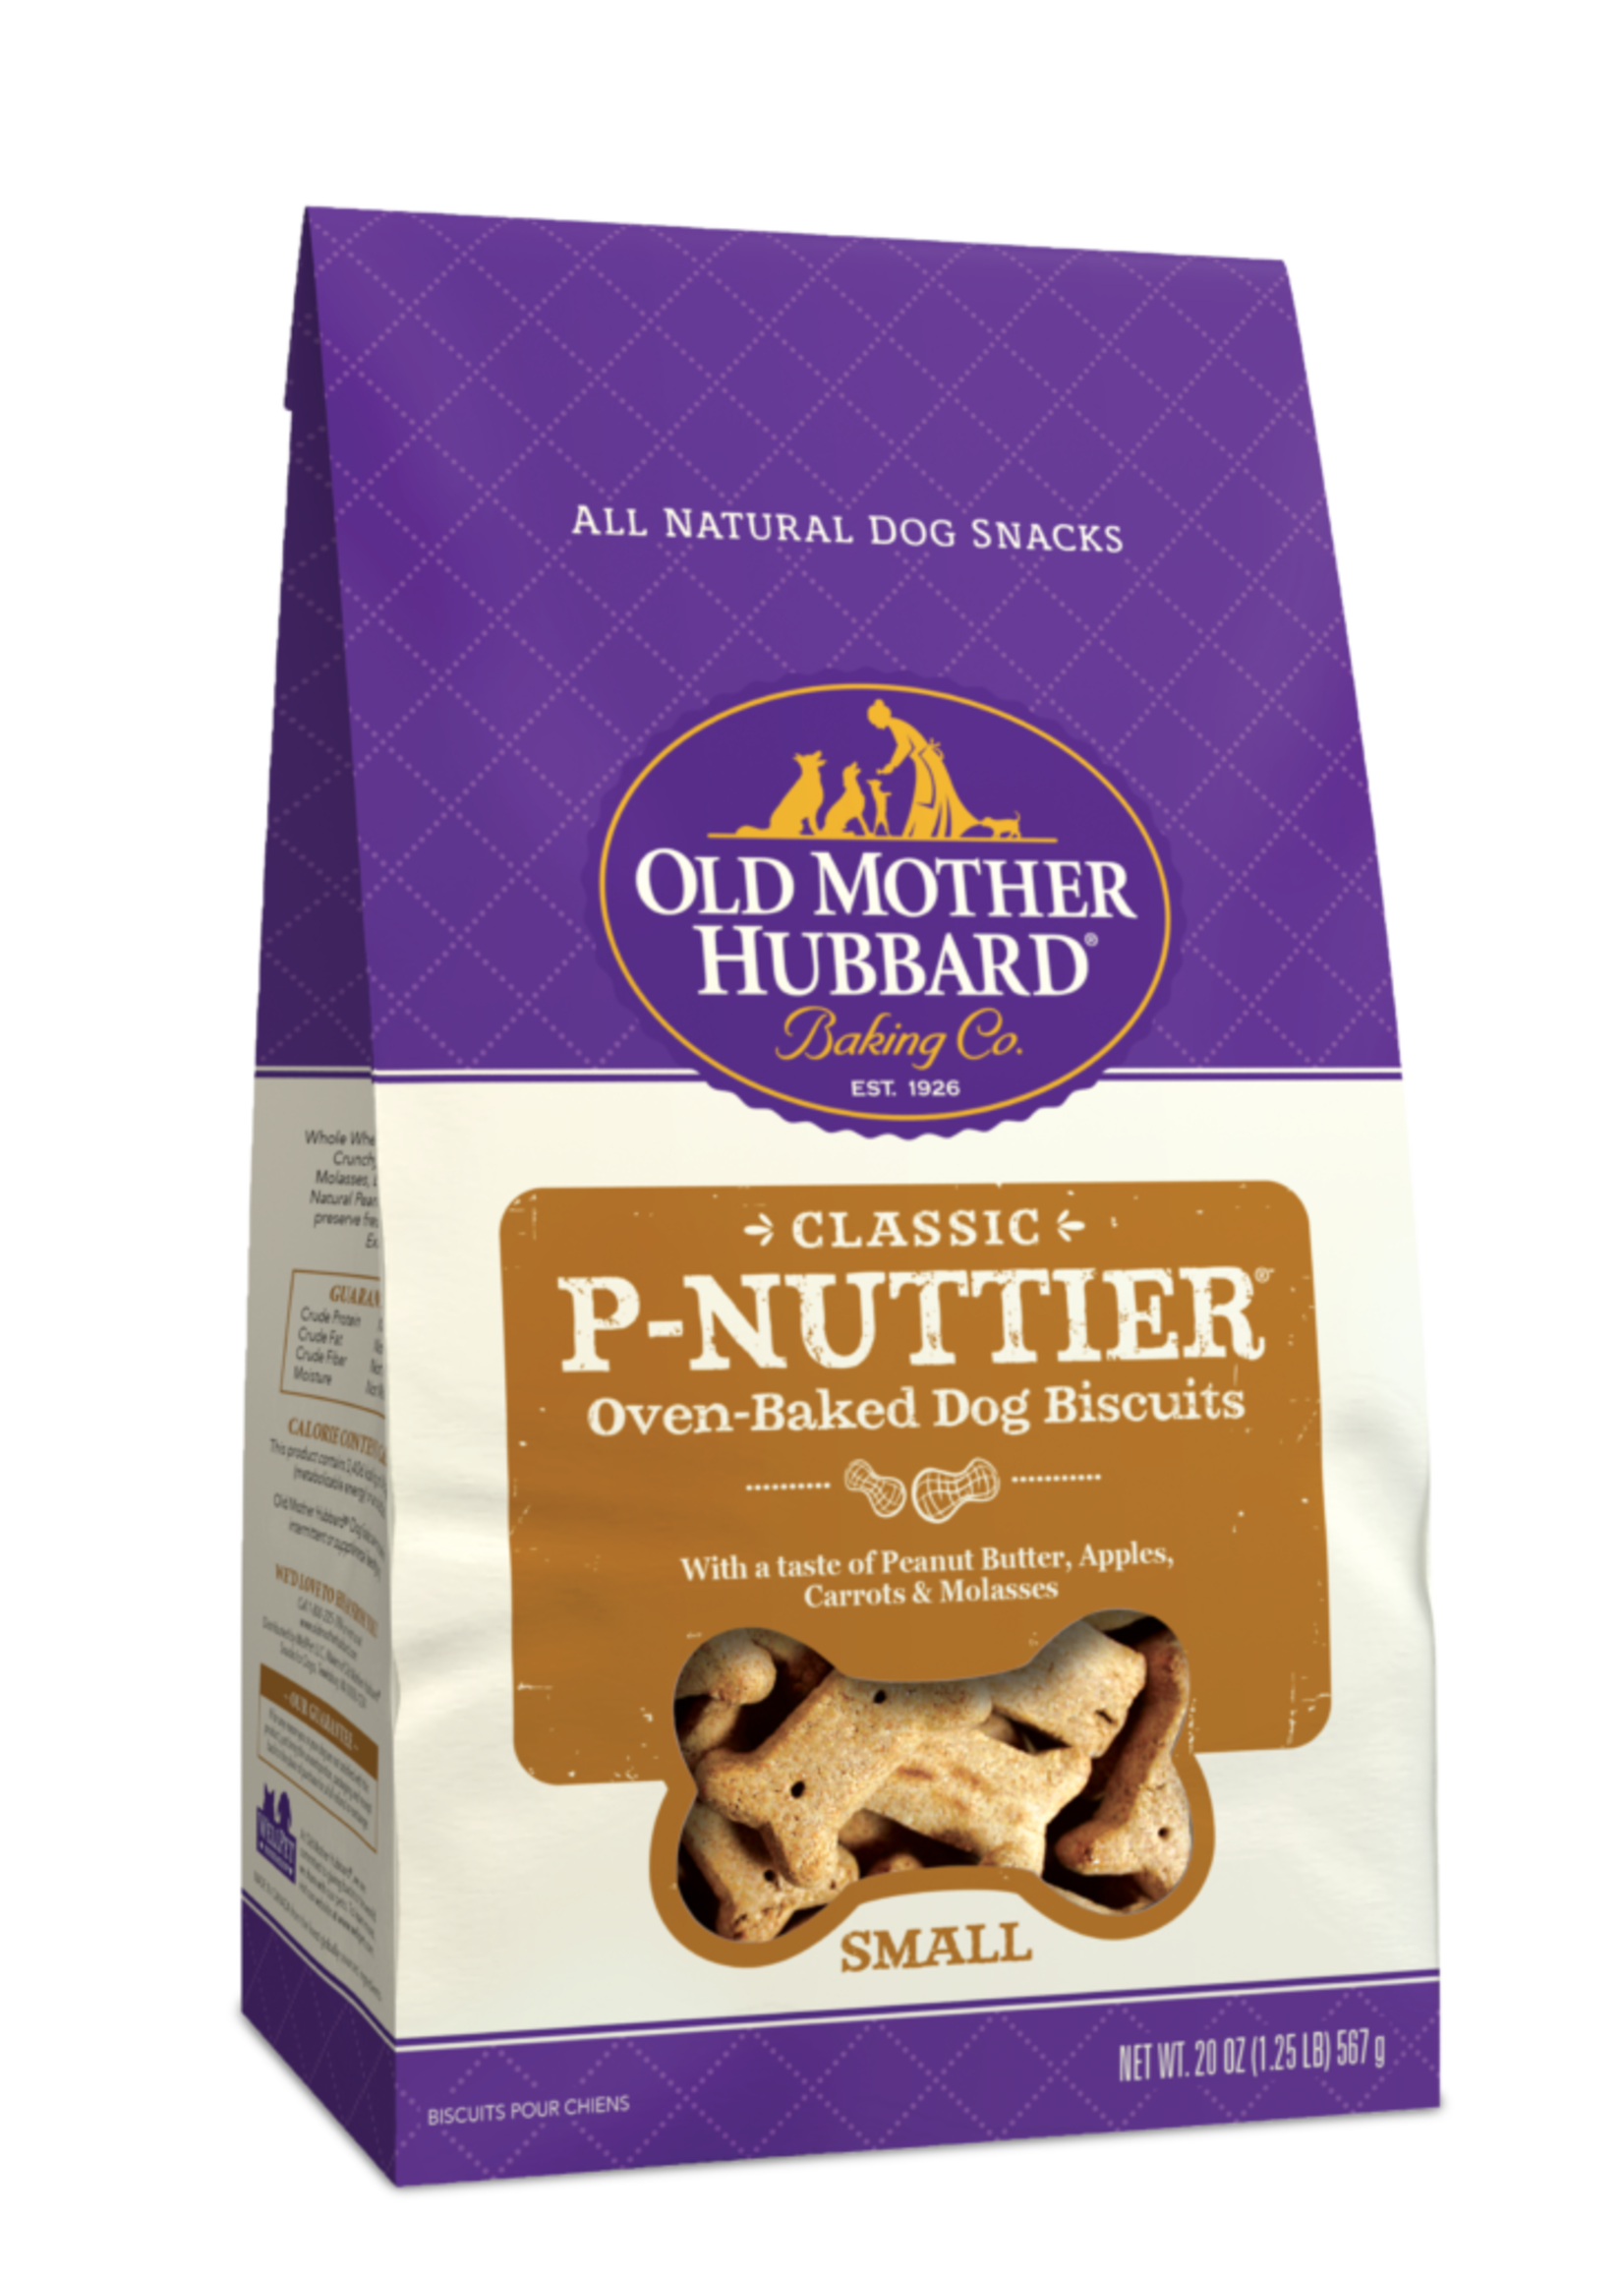 Old Mother Hubbard Old Mother Hubbard P-Nuttier